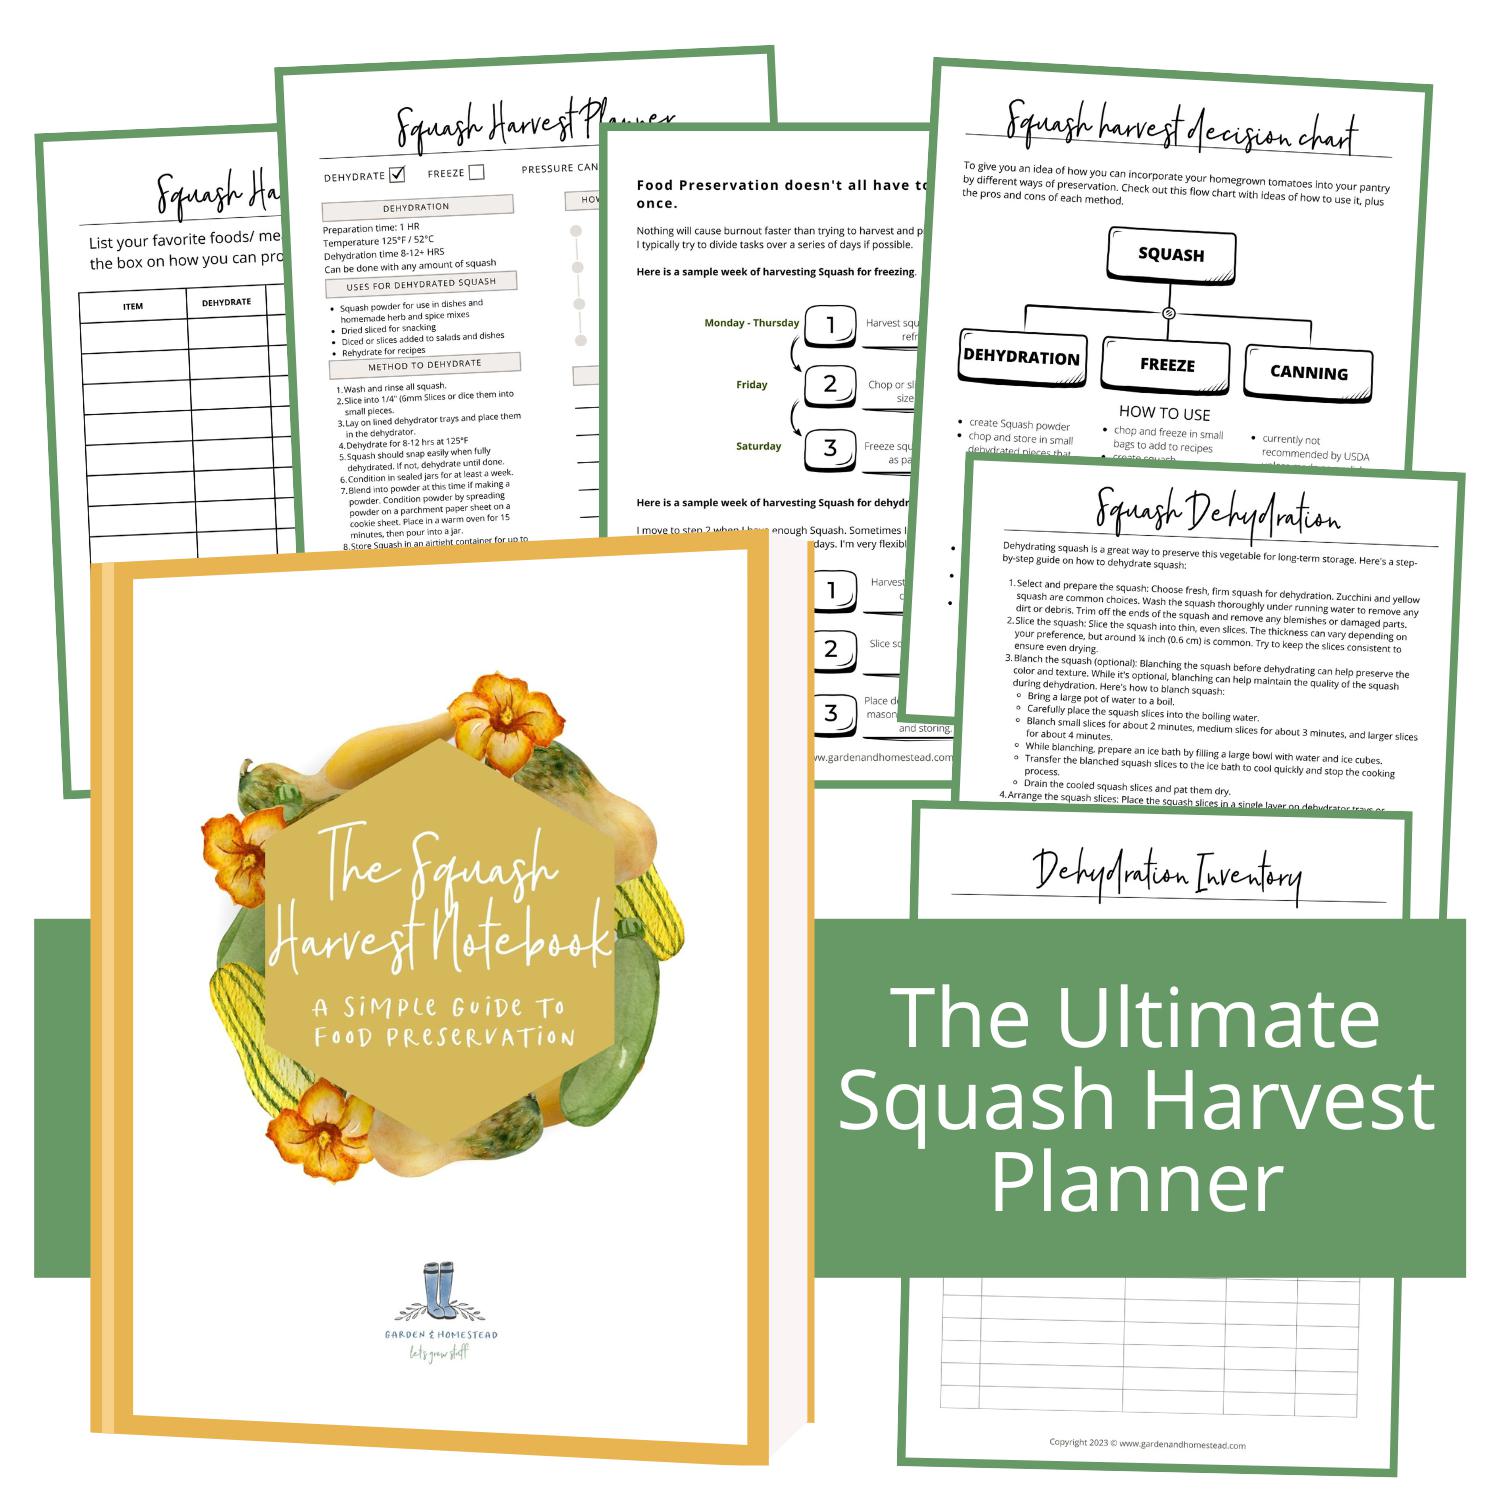 images shows 7 pages of a PDF notebook that can teach you how to preserve your squash harvest